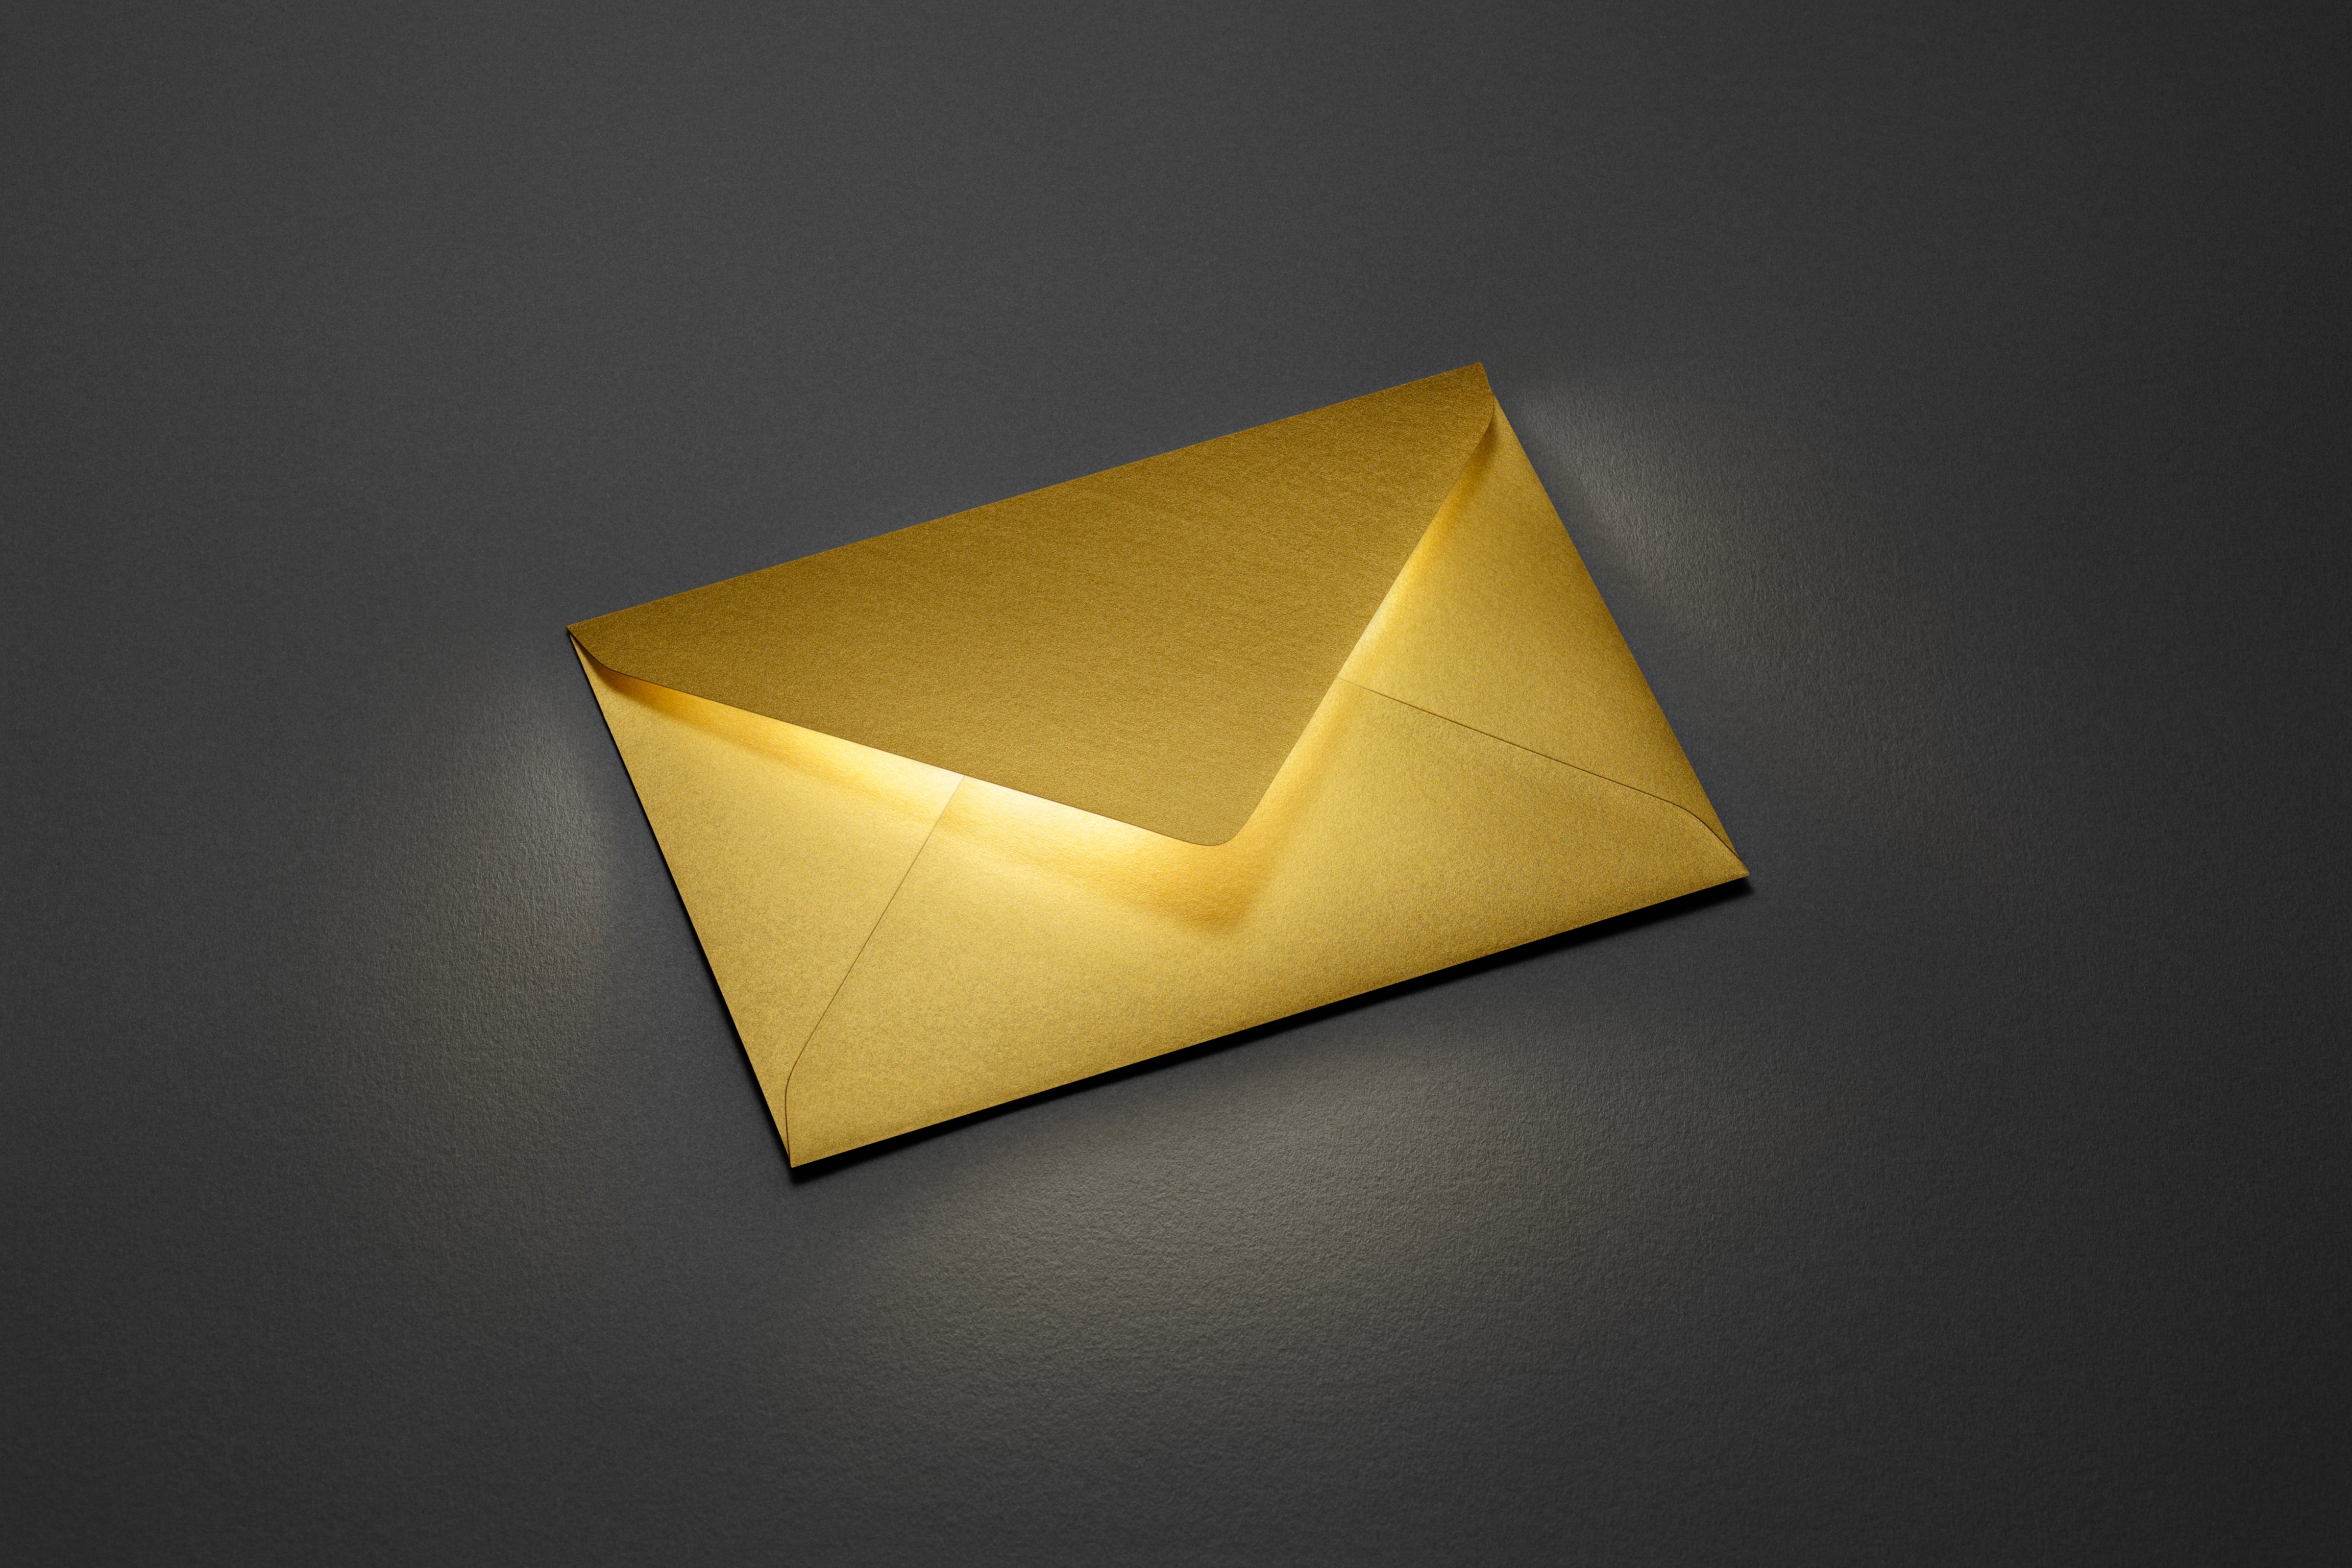 Light imitating from within the envelope (Sam Hofman—Getty Images)